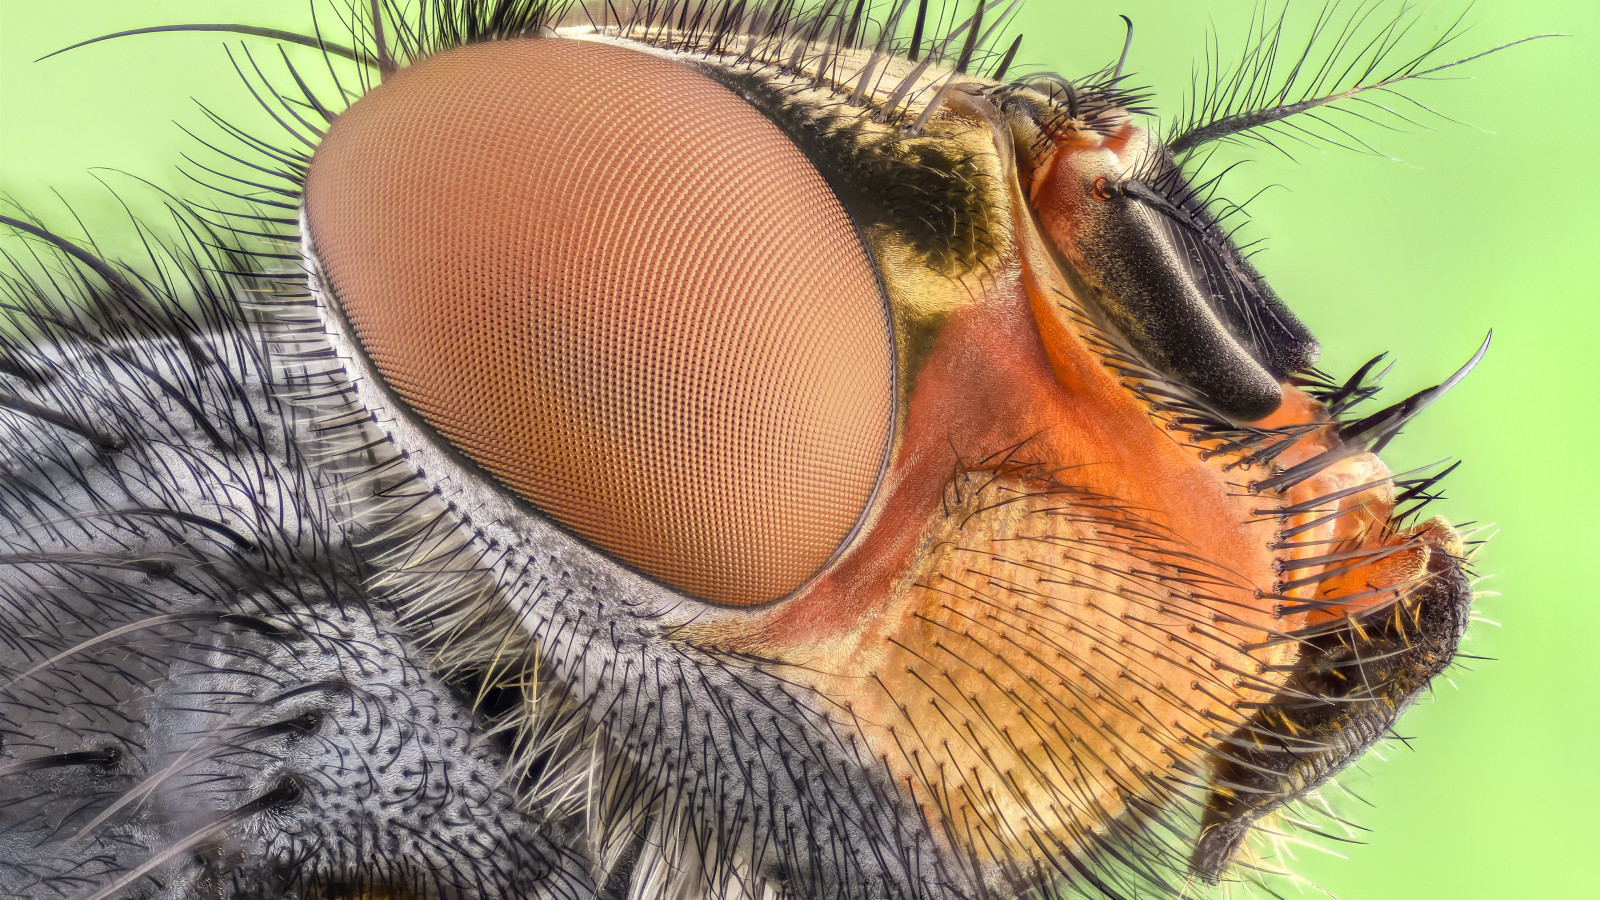 Close up insect portrait wallpaper 1600x900